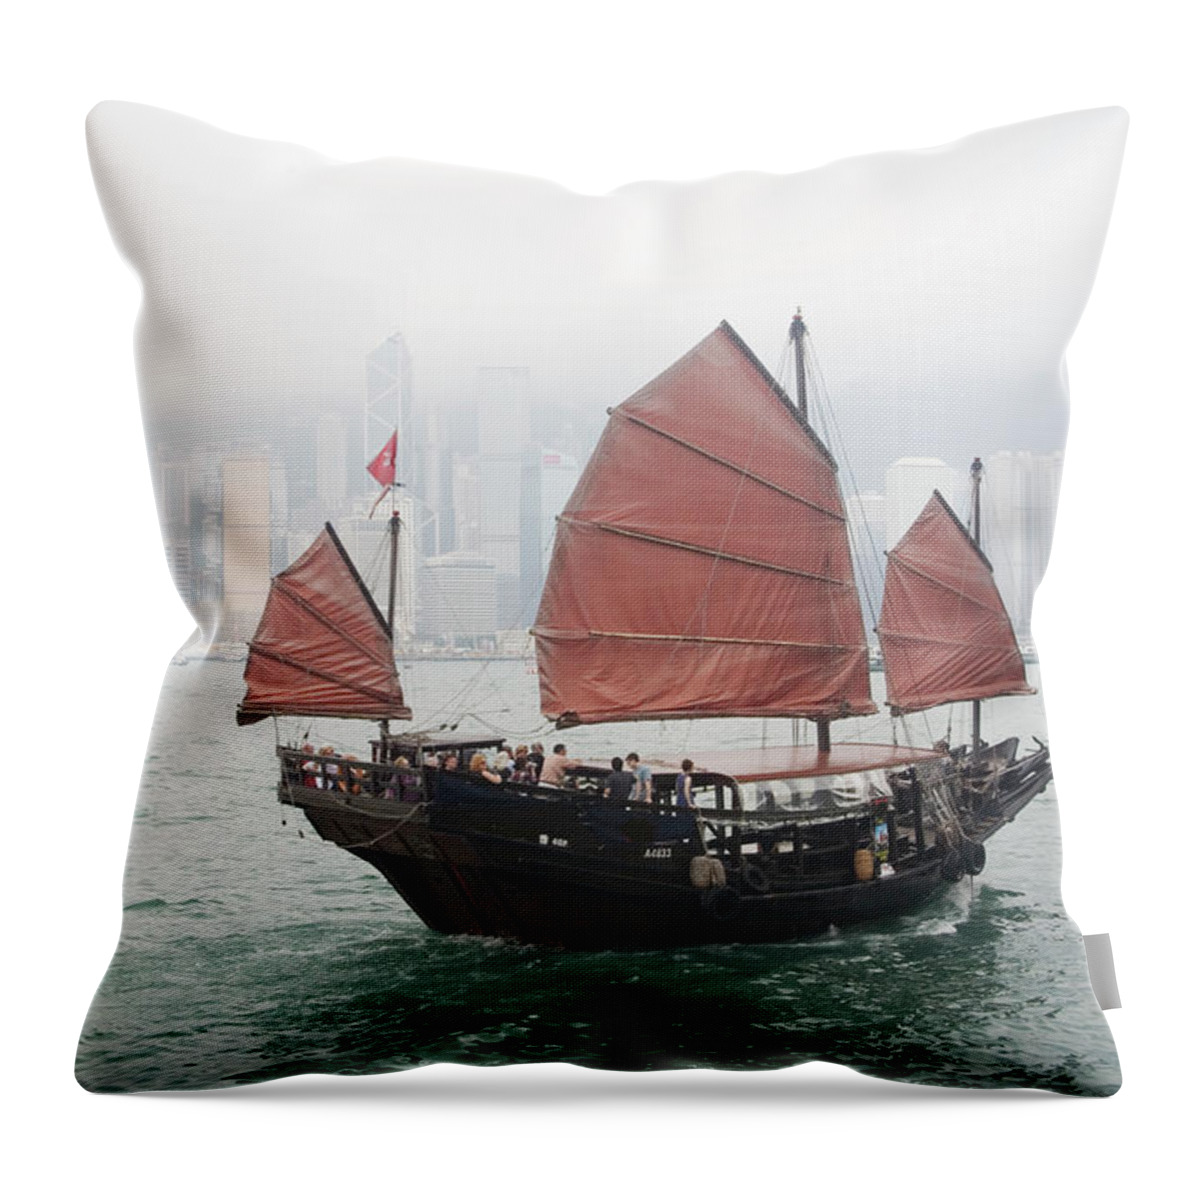 Outdoors Throw Pillow featuring the photograph Tourist Junk On Cruise by Romana Chapman